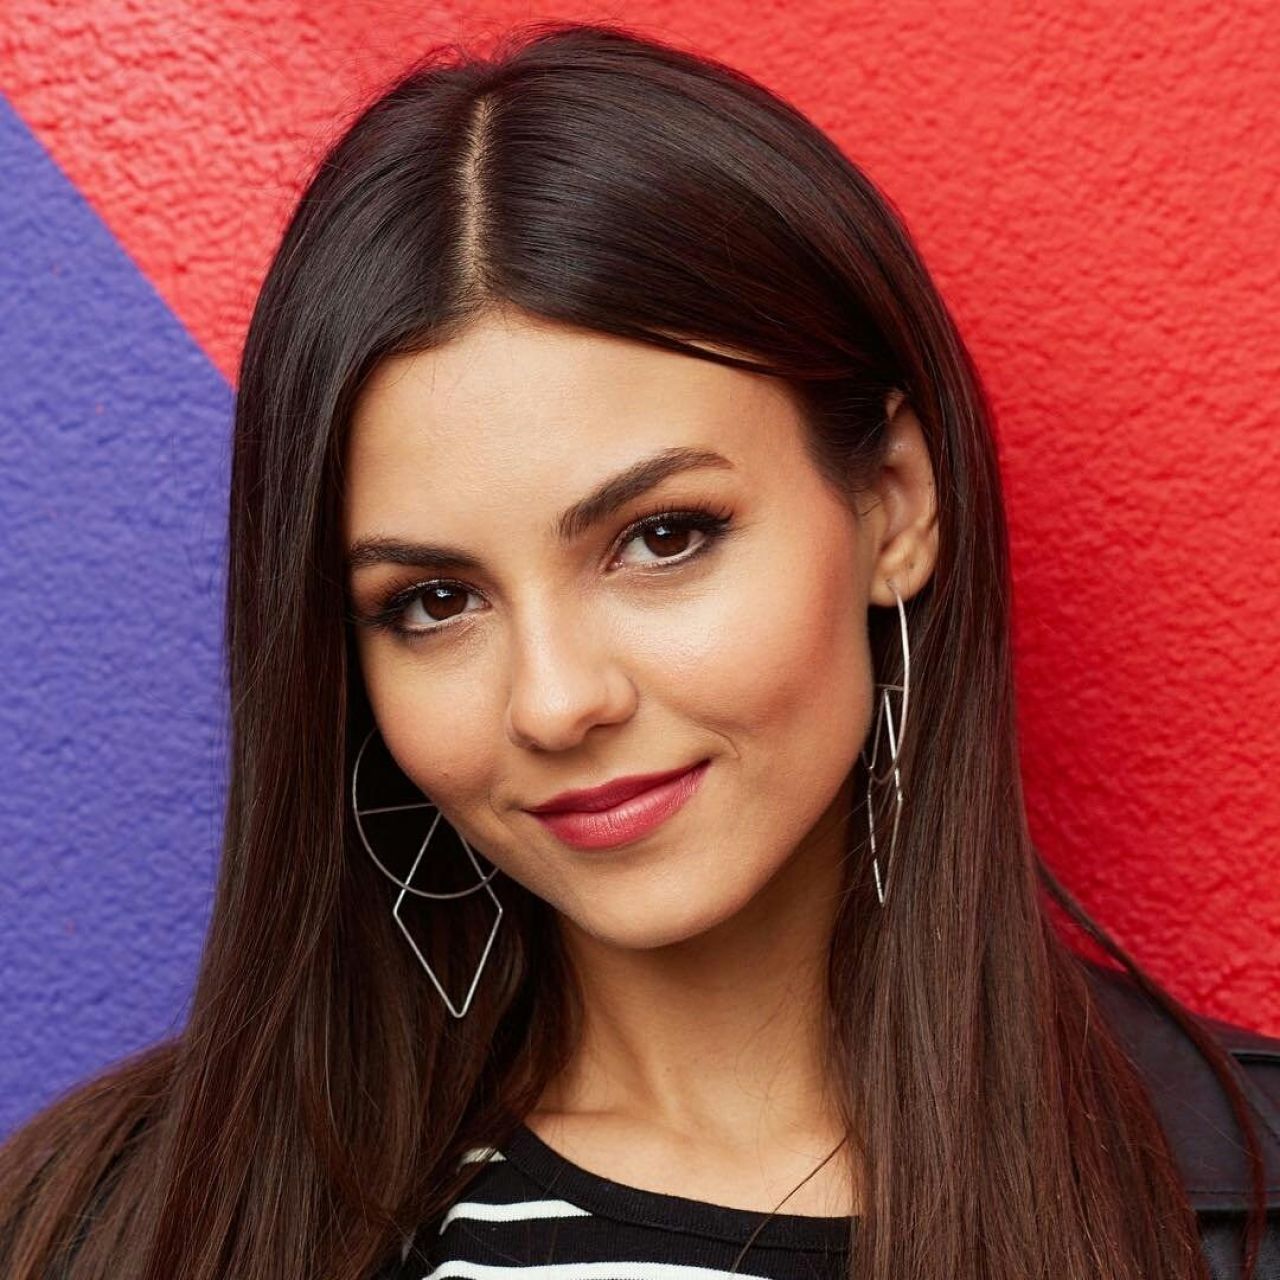 VICTORIA JUSTICE at a Photoshoot in New York, April 2020 